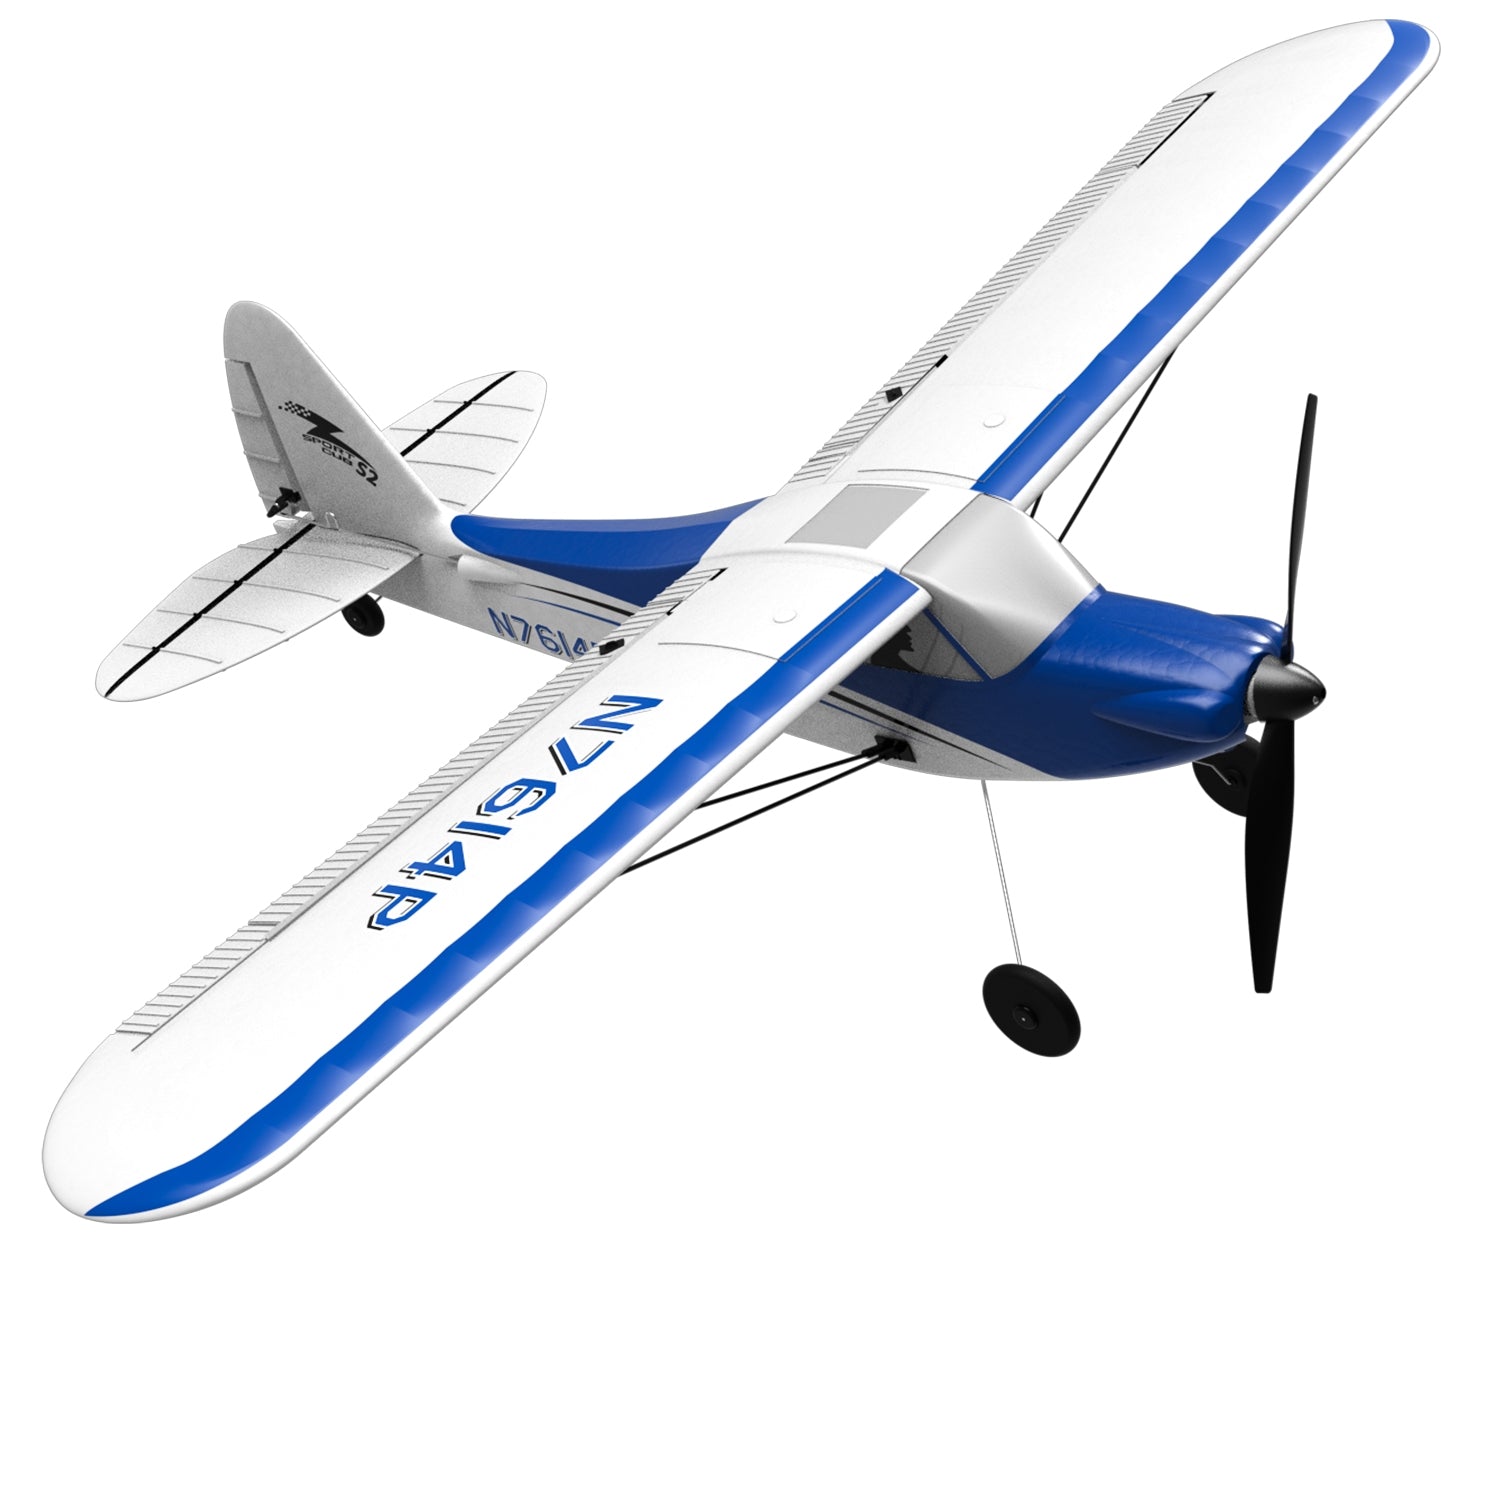 VOLANTEXRC Sport Cub 500mm Wingspan RC Trainer Airplane 4Channels Park flyer Gyro Easy Fly